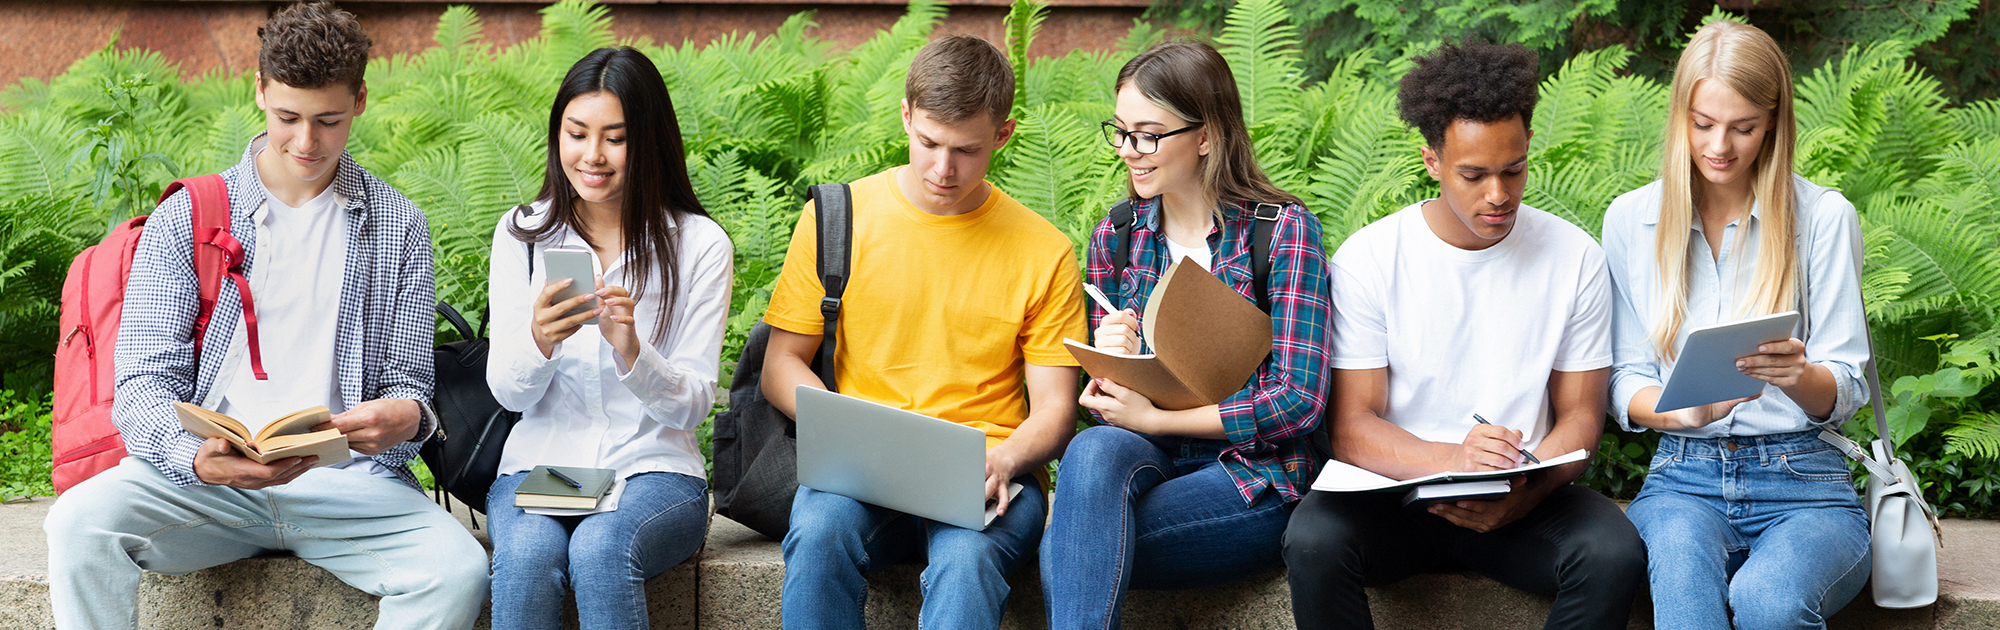 group of college students sitting and smiling using electronic devices